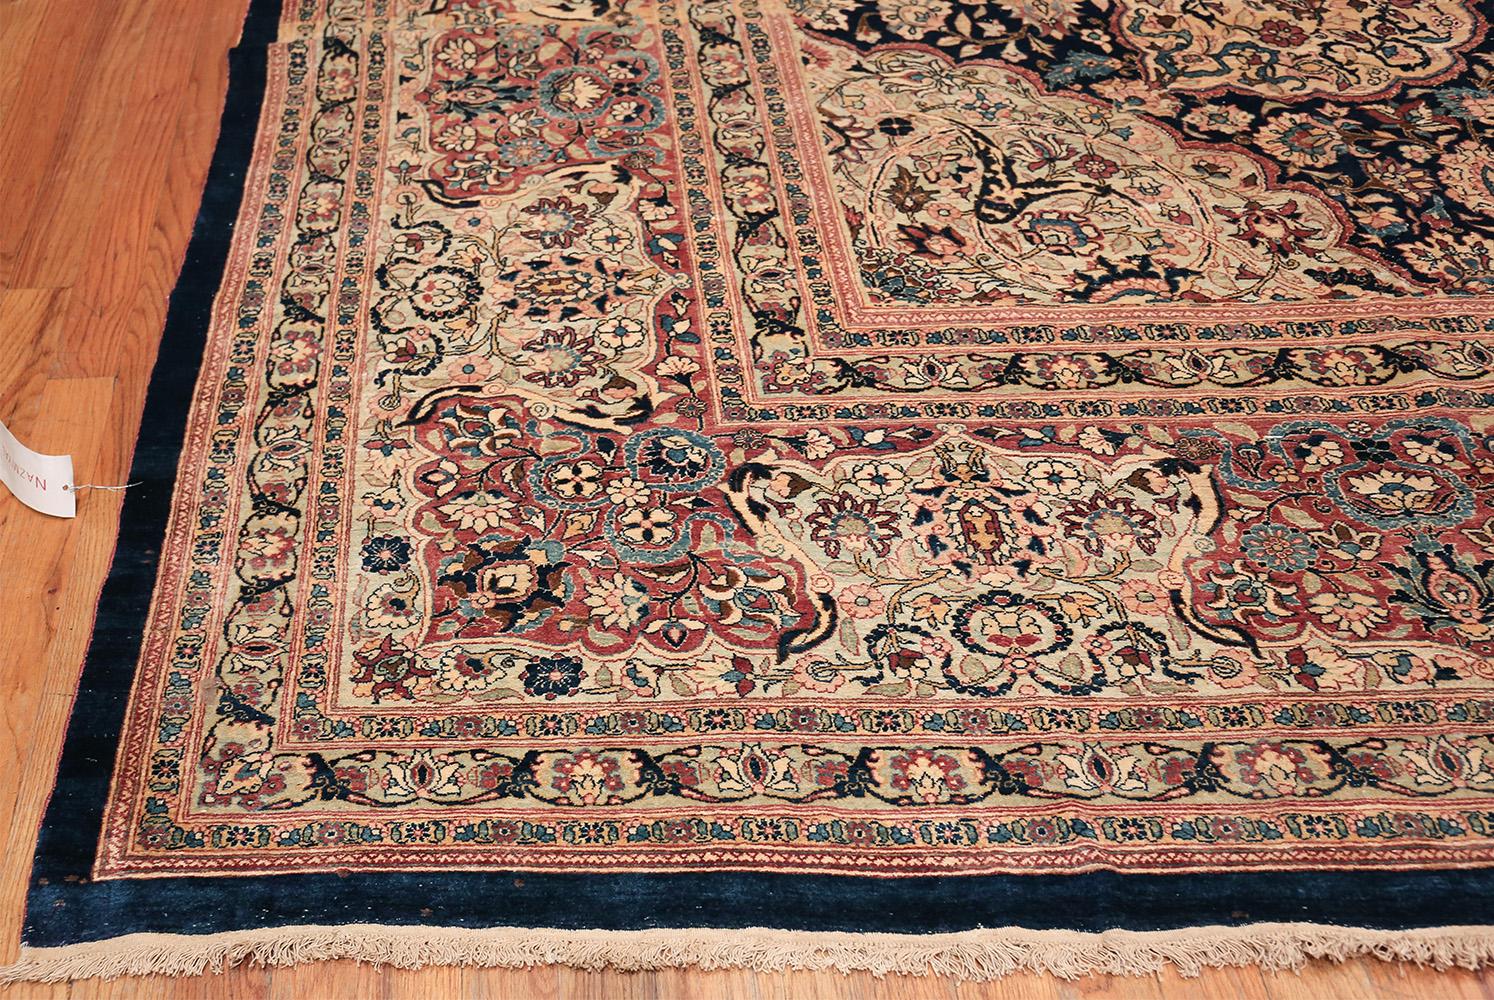 Oversized Antique Tehran Persian Carpet. Size: 14 ft 3 in x 22 ft 3 in 2